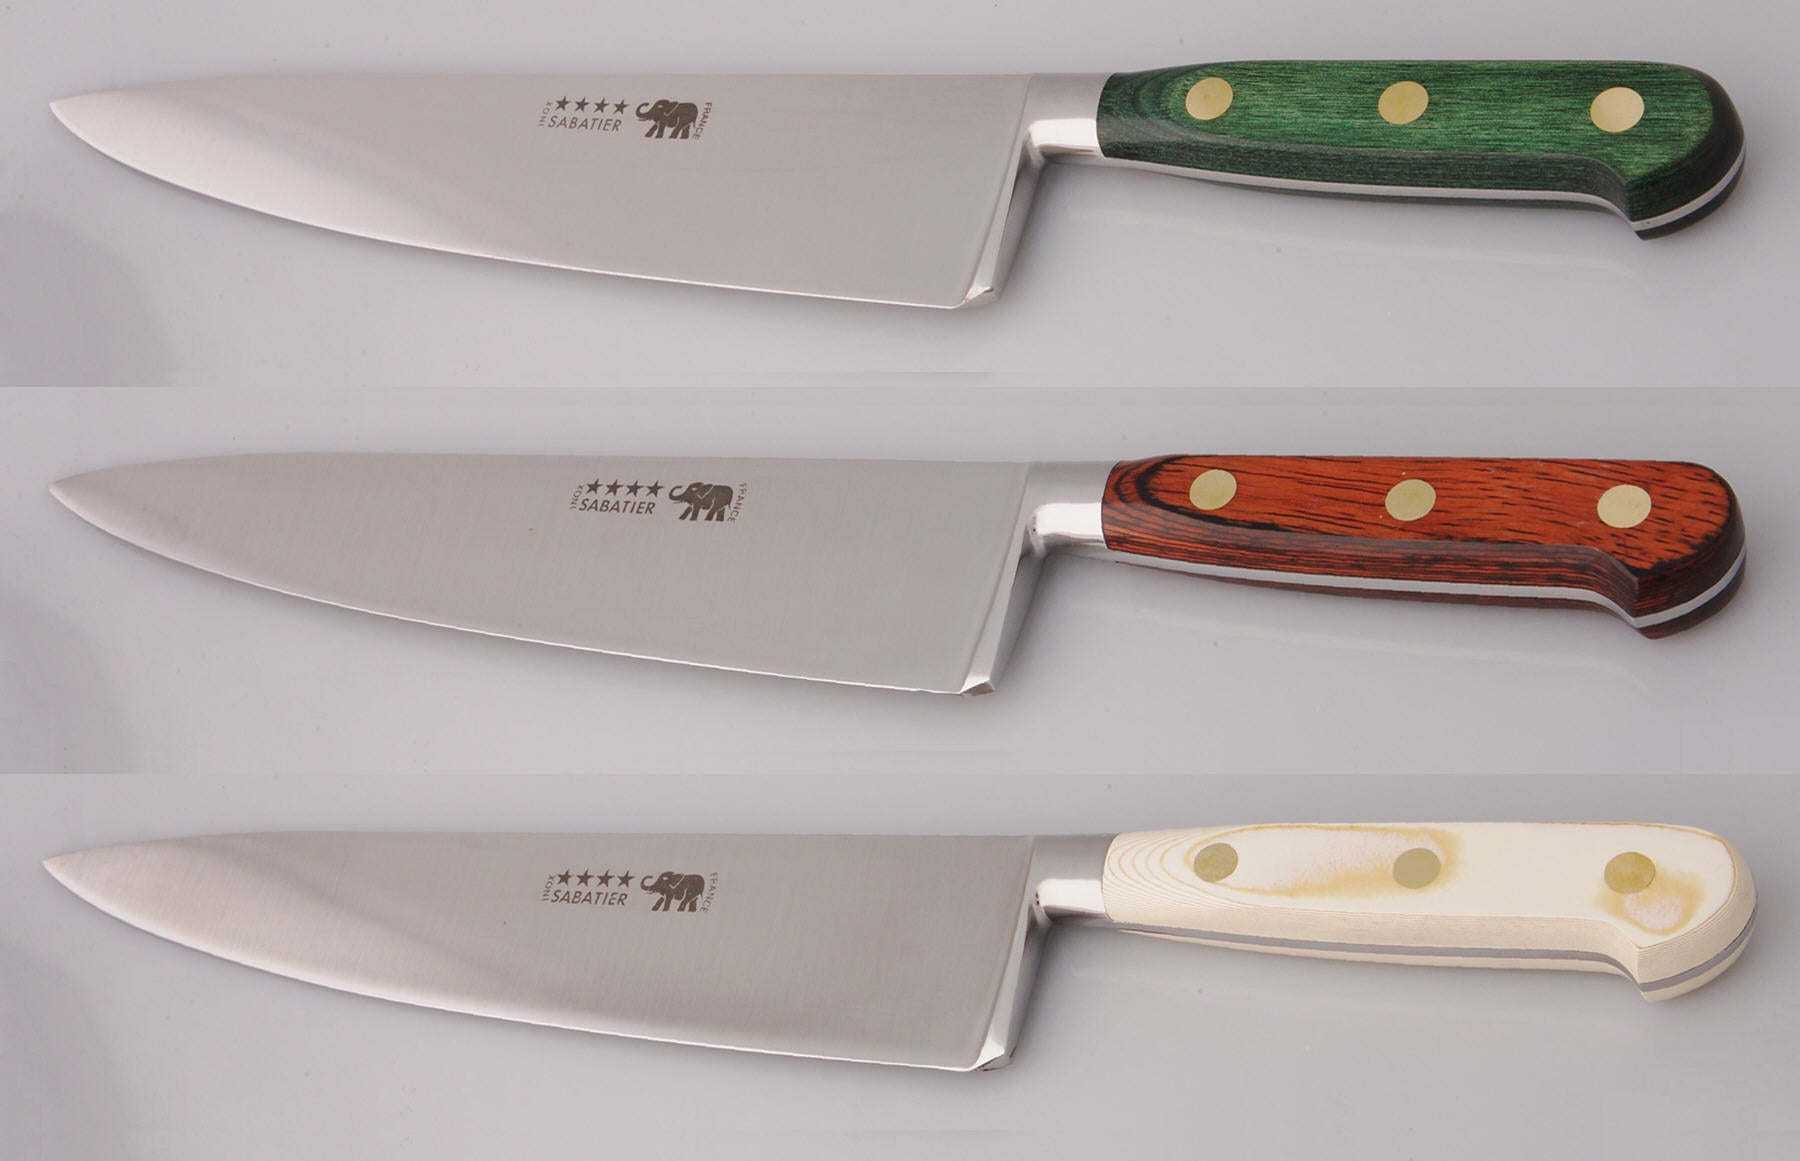 10 in (25 cm) Chef Knife - Stainless Steel